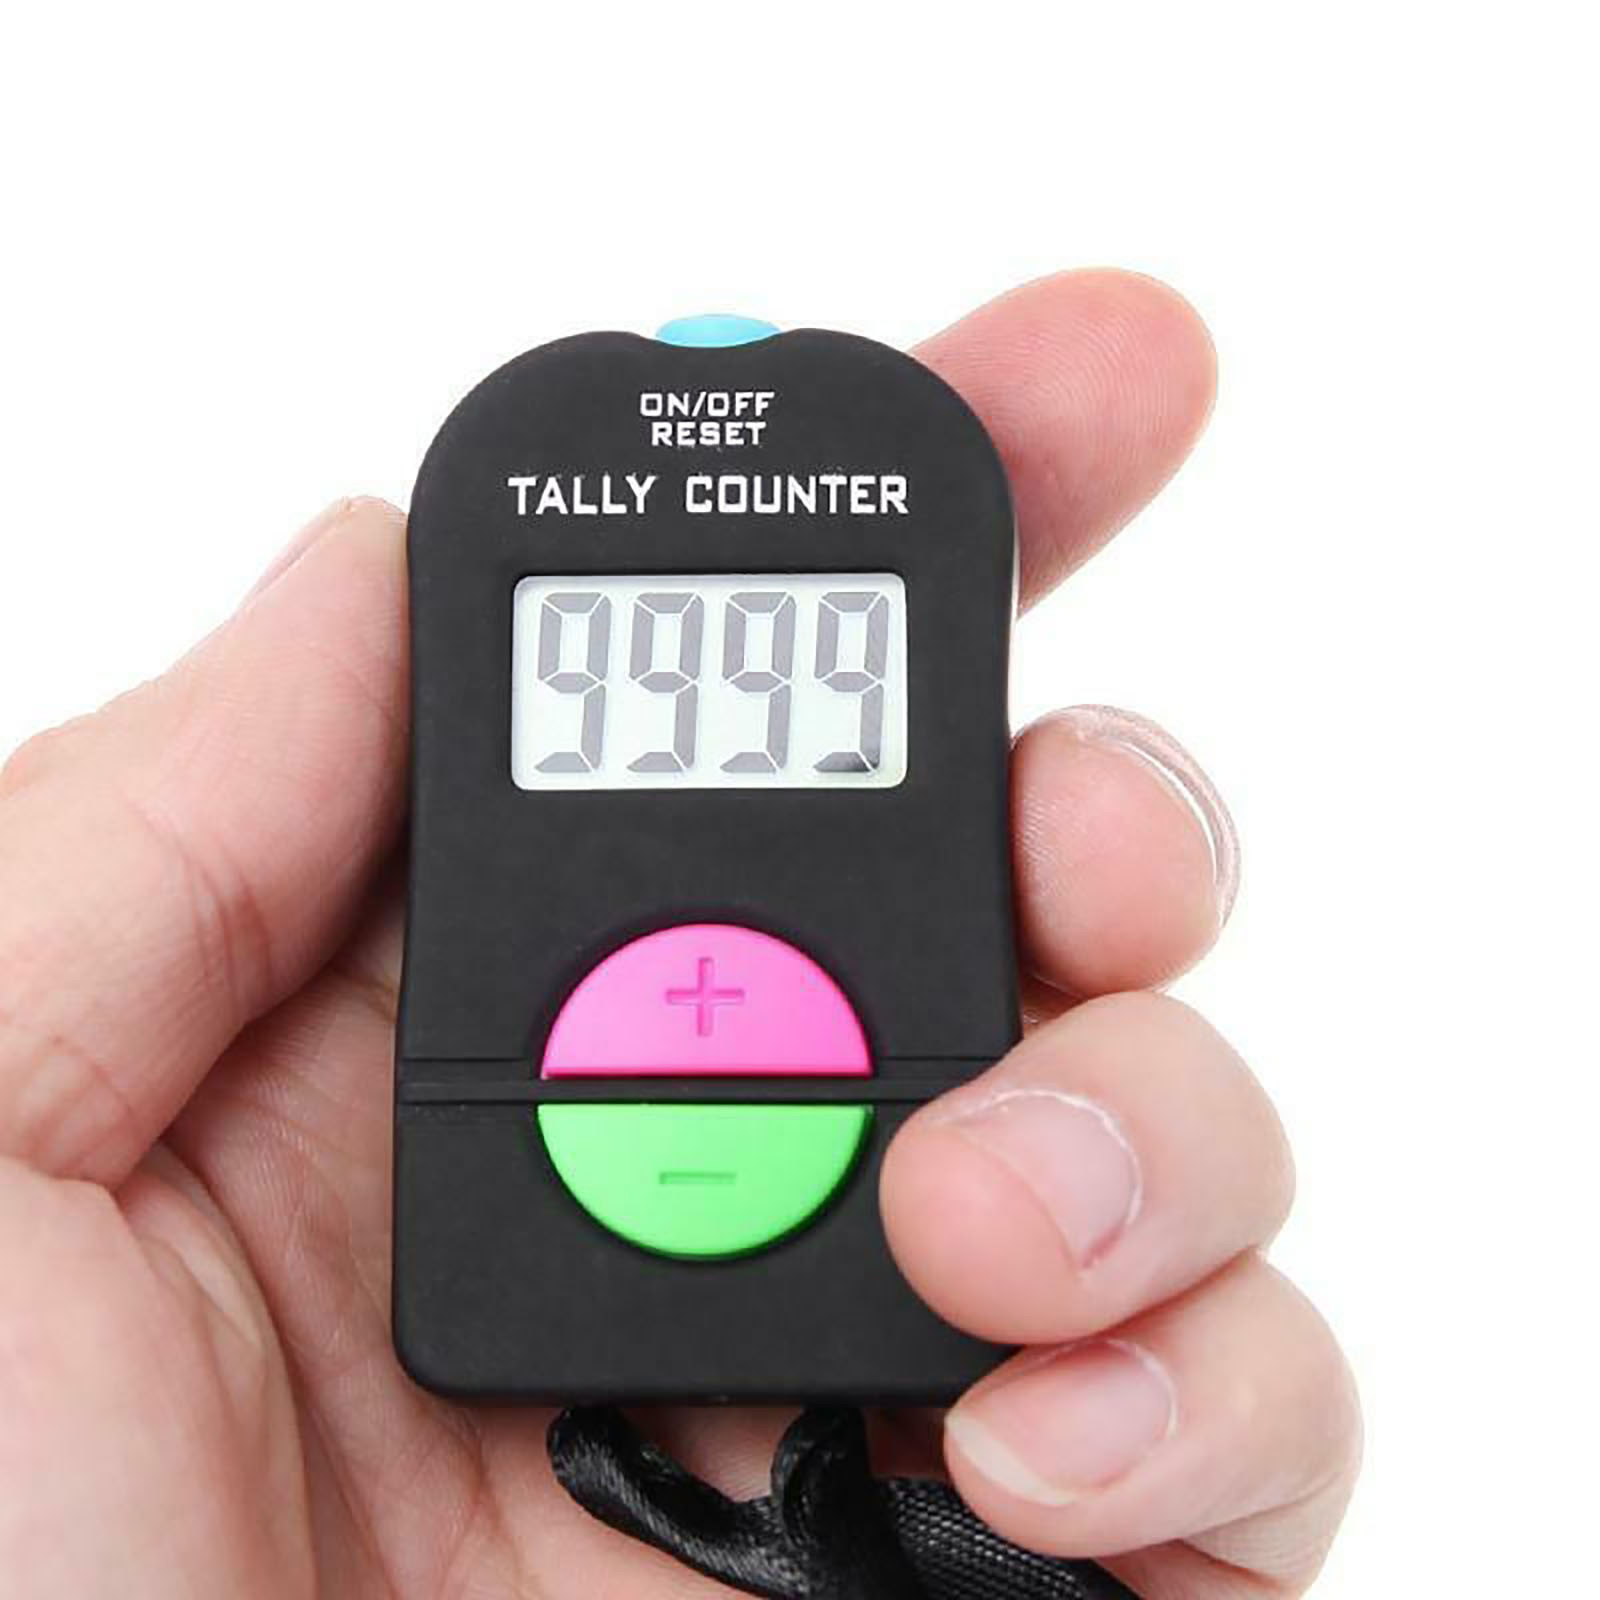 solacol Tally Counter Clicker Hand Tally Counter Golf Counter Clicker Digital Hand Tally Counter Electronic Manual Clicker Golf Gym Hand Held Counter Hand Counters Clickers - image 3 of 3